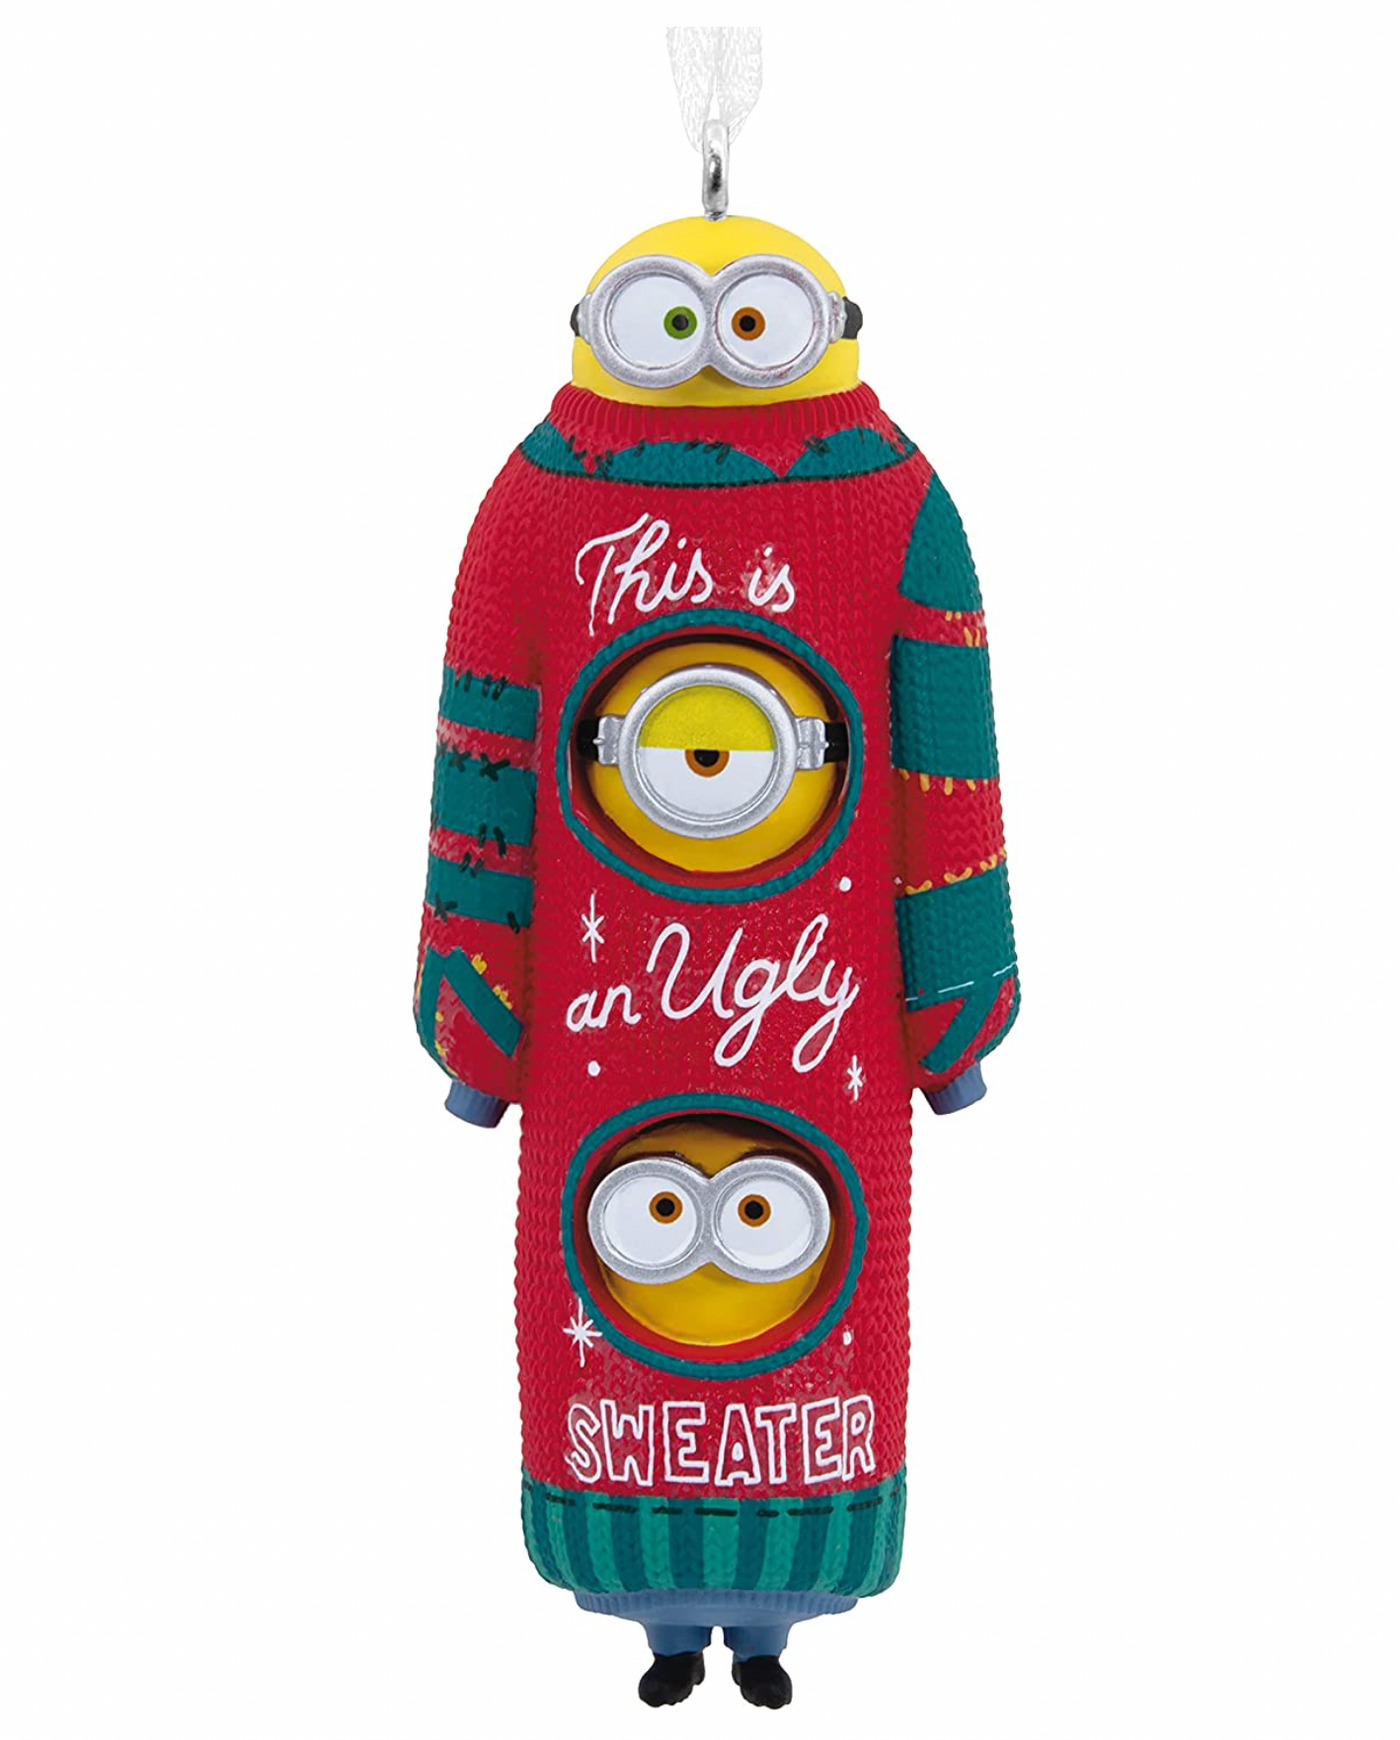 Hallmark The Minions in Ugly Christmas Sweater Christmas Ornament New with Box